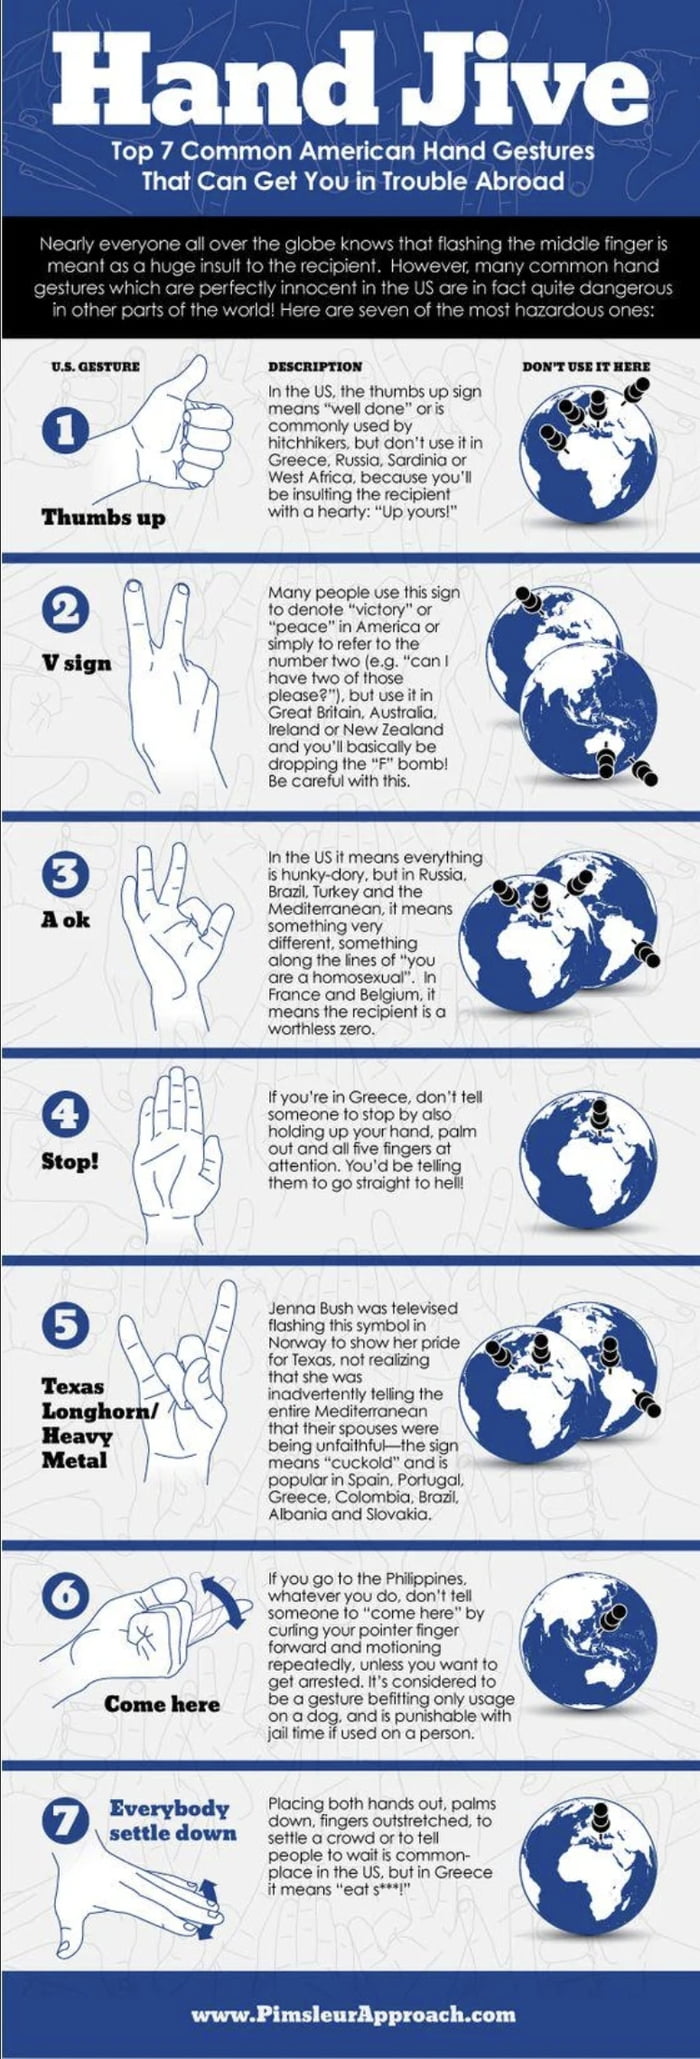 Hand jive (signs) different meaning in countries Image